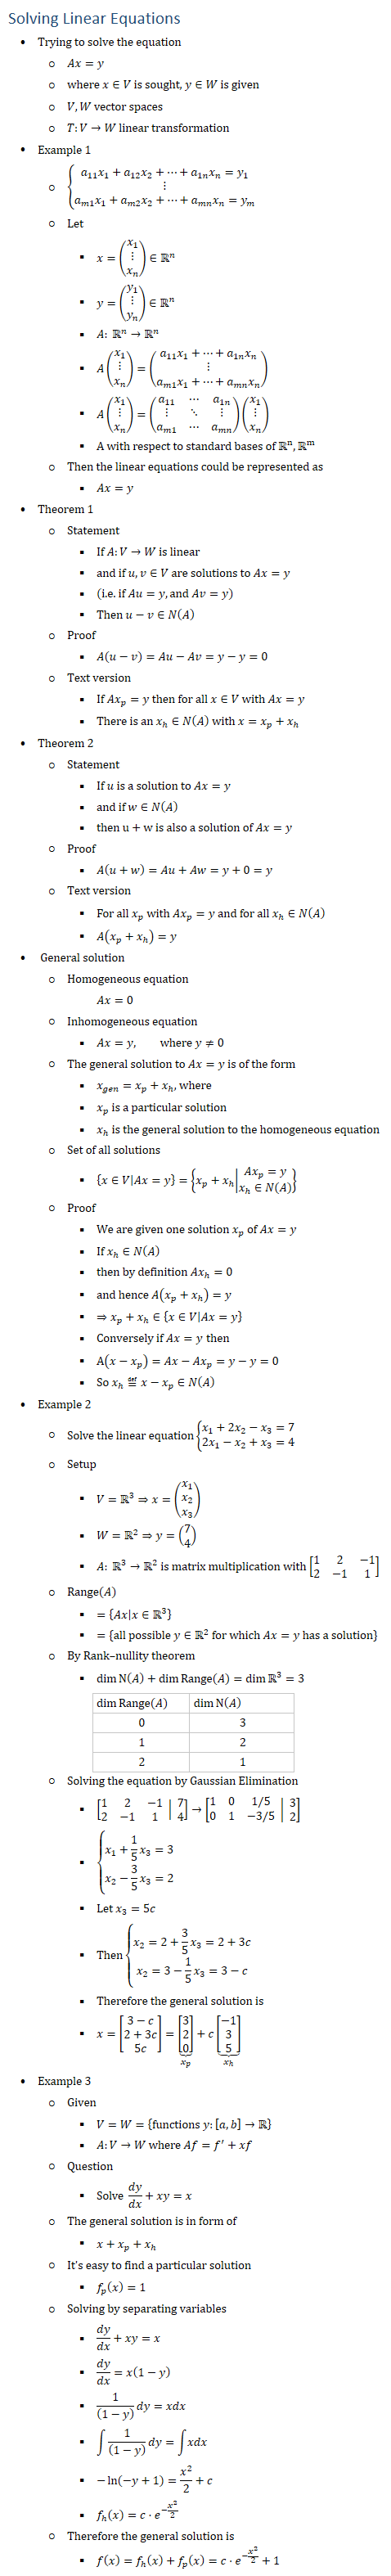 Solving Linear Equations • Trying to solve the equation ○ Ax=y ○ where x∈V is sought, y∈W is given ○ V,W vector spaces ○ T:V→W linear transformation • Example 1 ○ {█(a_11 x_1+a_12 x_2+…+a_1n x_n=y_1@⋮@a_m1 x_1+a_m2 x_2+…+a_mn x_n=y_m )┤ ○ Let § x=(█(x_1@⋮@x_n ))∈Rn § y=(█(y_1@⋮@y_n ))∈Rn § A: Rn→Rn § A(█(x_1@⋮@x_n ))=(█(a_11 x_1+…+a_1n x_n@⋮@a_m1 x_1+…+a_mn x_n )) § A(█(x_1@⋮@x_n ))=(■8(a_11&⋯&a_1n@⋮&⋱&⋮@a_m1&⋯&a_mn ))(█(x_1@⋮@x_n )) § A with respect to standard bases of Rn, Rm ○ Then the linear equations could be represented as § Ax=y • Theorem 1 ○ Statement § If A:V→W is linear § and if u,v∈V are solutions to Ax=y § (i.e. if Au=y, and Av=y) § Then u−v∈N(A) ○ Proof § A(u−v)=Au−Av=y−y=0 ○ Text version § If 〖Ax〗_p=y then for all x∈V with Ax=y § There is an x_ℎ∈N(A) with x=x_p+x_ℎ • Theorem 2 ○ Statement § If u is a solution to Ax=y § and if w∈N(A) § then u+w is also a solution of Ax=y ○ Proof § A(u+w)=Au+Aw=y+0=y ○ Text version § For all x_p with 〖Ax〗_p=y and for all x_ℎ∈N(A) § A(x_p+x_h)=y • General solution ○ Homogeneous equation Ax=0 ○ Inhomogeneous equation § Ax=y, where y≠0 ○ The general solution to Ax=y is of the form § x_gen=x_p+x_ℎ, where § x_p is a particular solution § x_h is the general solution to the homogeneous equation ○ Set of all solutions § {x∈V│Ax=y}={x_p+x_h■8(Ax_p=y@x_hN(A) )} ○ Proof § We are given one solution x_p of Ax=y § If x_ℎ∈N(A) § then by definition 〖Ax〗_ℎ=0 § and hence A(x_p+x_h)=y § ⇒x_p+x_ℎ∈{x∈V│Ax=y} § Conversely if Ax=y then § A(x−x_p )=Ax−Ax_p=y−y=0 § So x_ℎ≝x−x_p∈N(A) • Example 2 ○ Solve the linear equation{█(x_1+2x_2−x_3=7@2x_1−x_2+x_3=4)┤ ○ Setup § V=R3⇒x=(█(x_1@x_2@x_3 )) § W=R2⇒y=(█(7@4)) § A: R3→R2 is matrix multiplication with [■8(1&2&−1@2&−1&1)] ○ Range(A) § ={Ax│x∈R3 } § ={all possible y∈R2 for which Ax=y has a solution} ○ By Rank–nullity theorem § dim⁡〖N(A)+dim⁡〖Range(A)〗=dim⁡〖R3 〗=3〗 dim⁡〖Range(A)〗 dim⁡N(A) 0 3 1 2 2 1 ○ Solving the equation by Gaussian Elimination § [■8(1&2&−1@2&−1&1) │ ■8(7@4)]→[■8(1&0&1/5@0&1&−3/5) │ ■8(3@2)] § {█(x_1+1/5 x_3=3@x_2−3/5 x_3=2)┤ § Let x_3=5c § Then{█(x_2=2+3/5 x_3=2+3c@x_2=3−1/5 x_3=3−c)┤ § Therefore the general solution is § x=[█(3−c@2+3c@5c)]=⏟([█(3@2@0)] )┬(x_p )+c⏟([█(−1@3@5)] )┬(x_h) • Example 3 ○ Given § V=W={functions y:[a,b]→R § A:V→W where Af=f^′+xf ○ Question § Solve dy/dx+xy=x ○ The general solution is in form of § x+x_p+x_ℎ ○ It